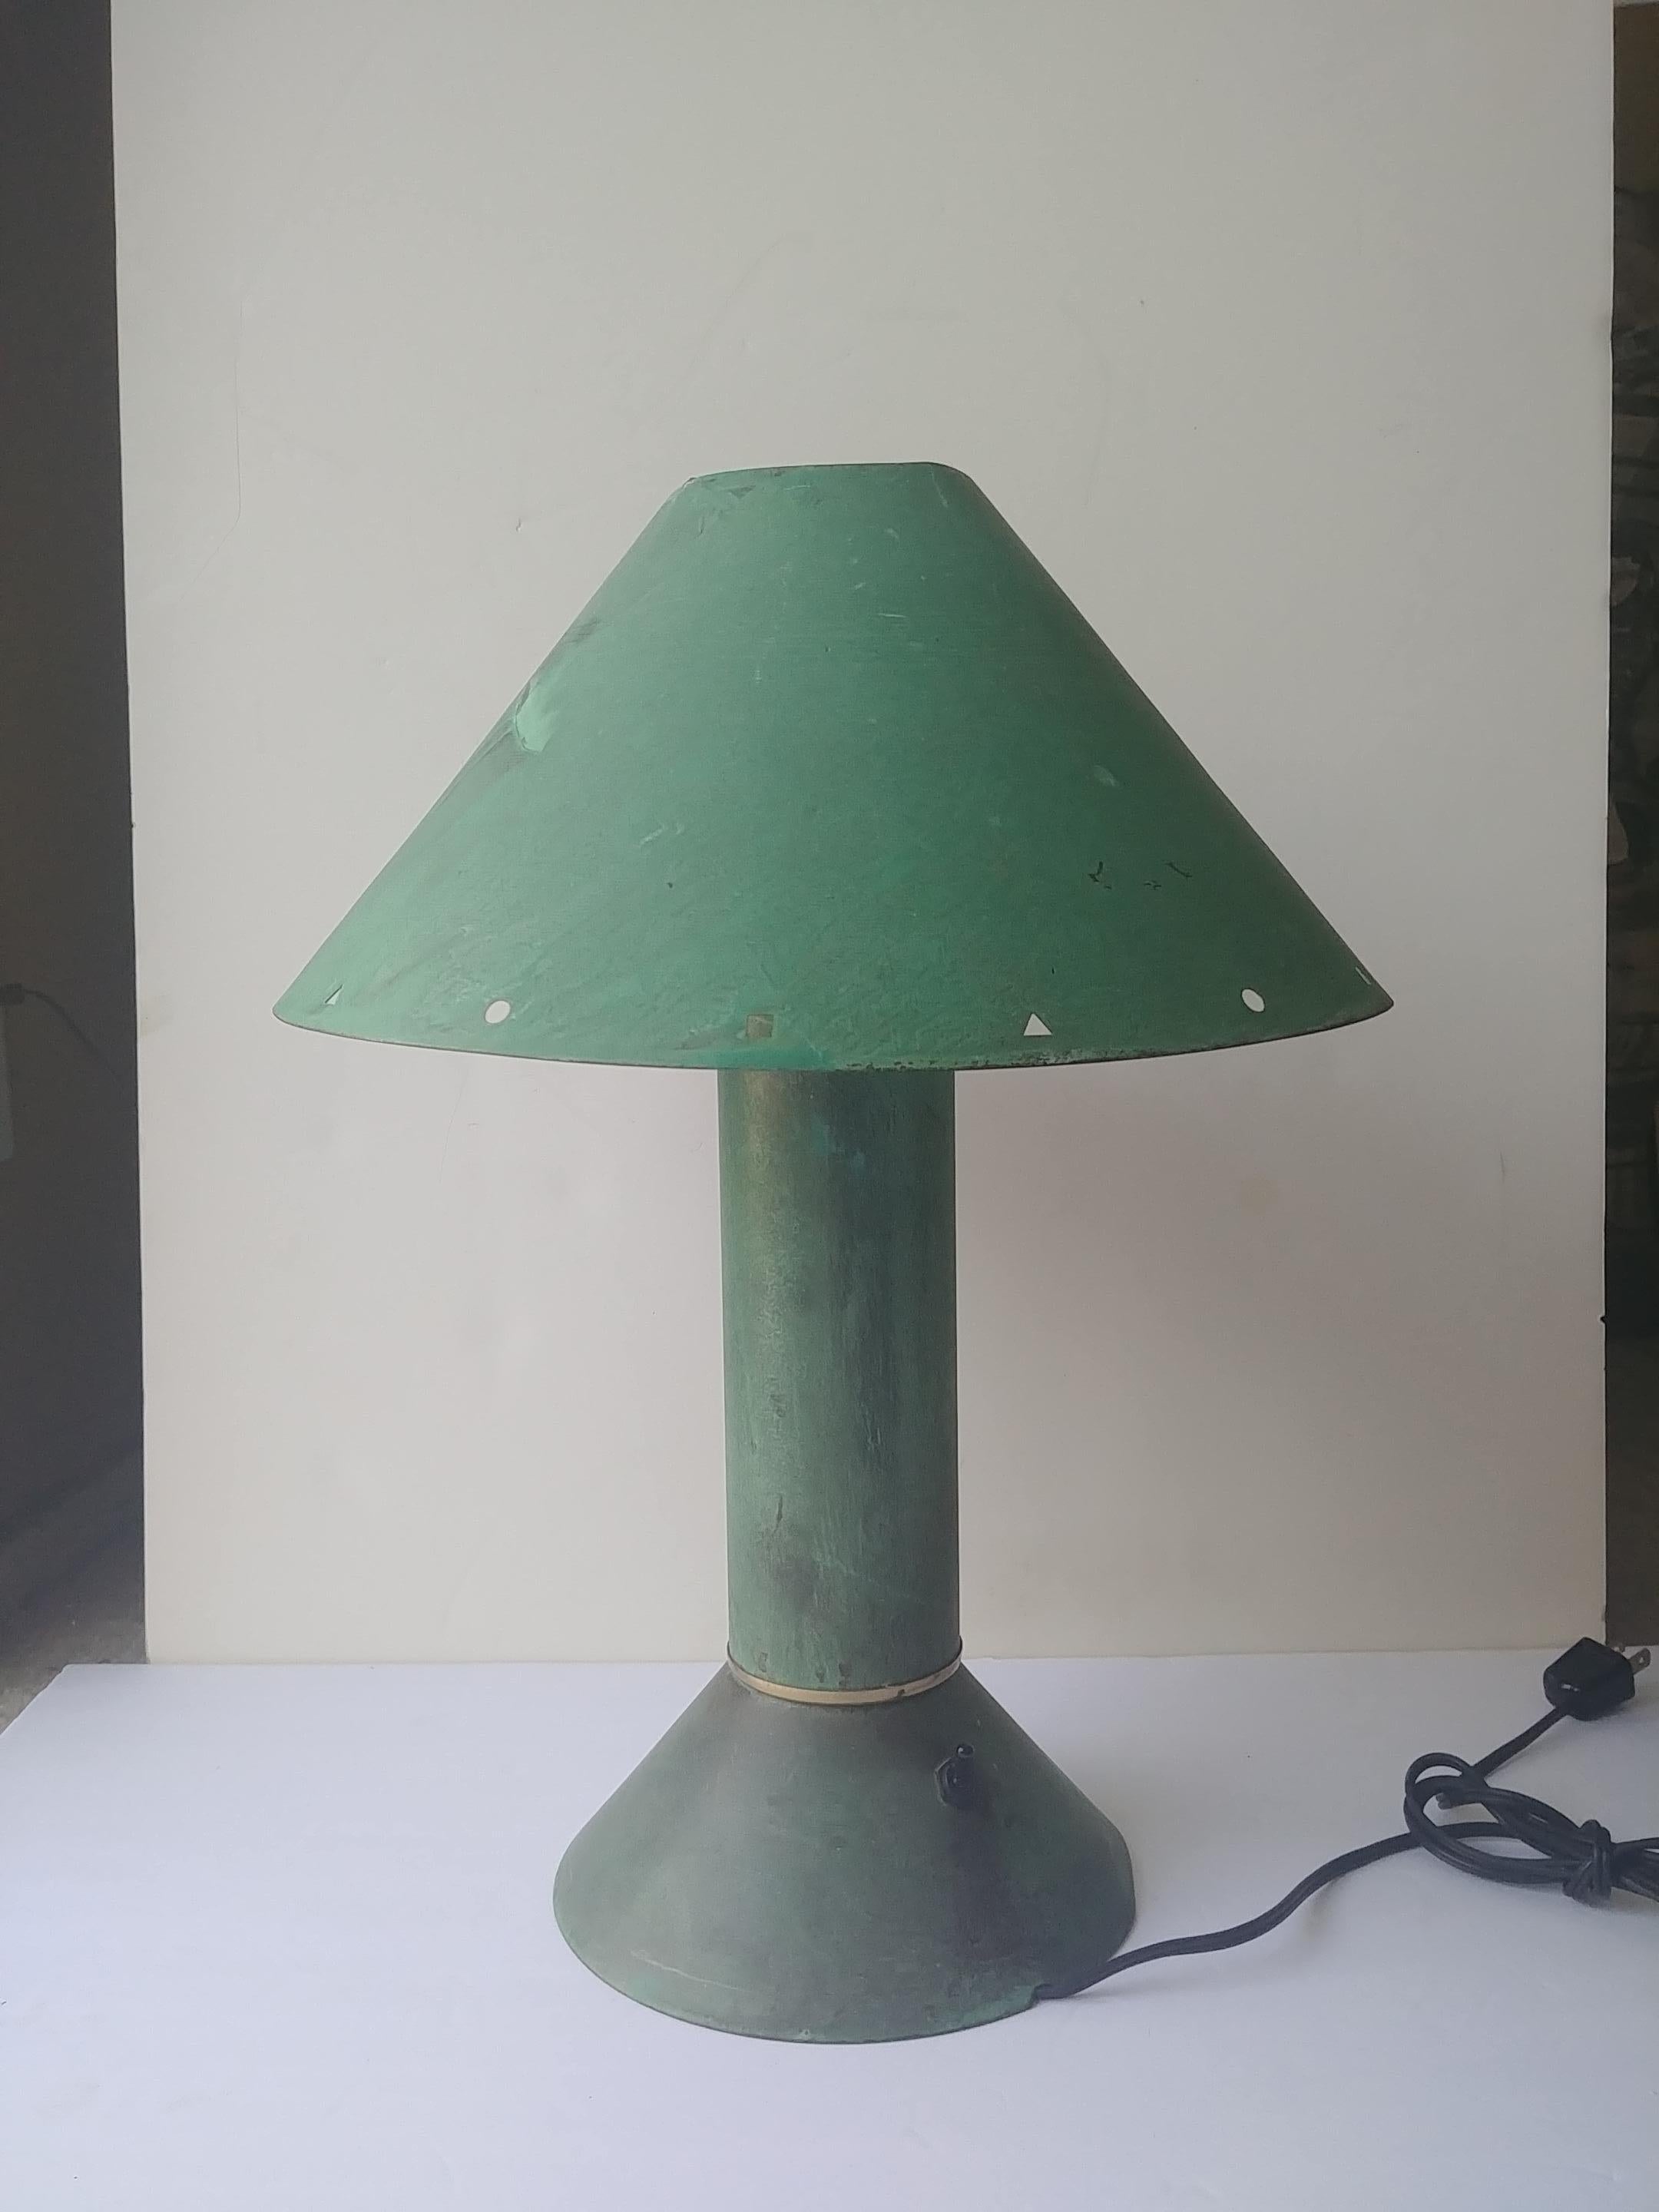 Great and nice 1980s industrial design with the very popular aqua /pastel colors of the time. All metal lamp in a verdigris patina. Has a white metal lining as shown.